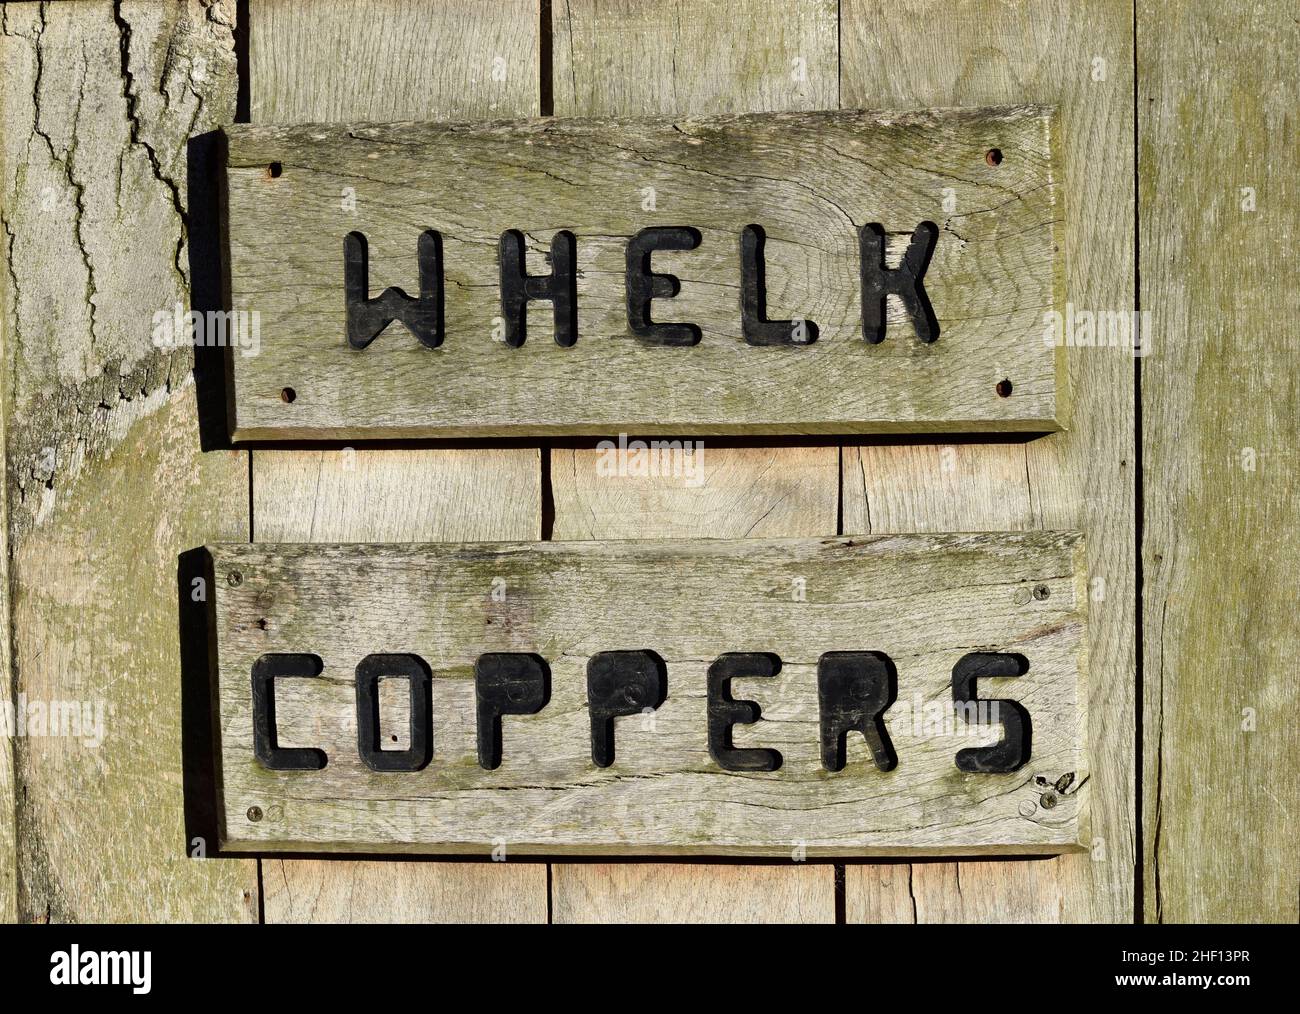 wooden sign for whelk coppers tea room, sheringham, north norfolk, england Stock Photo